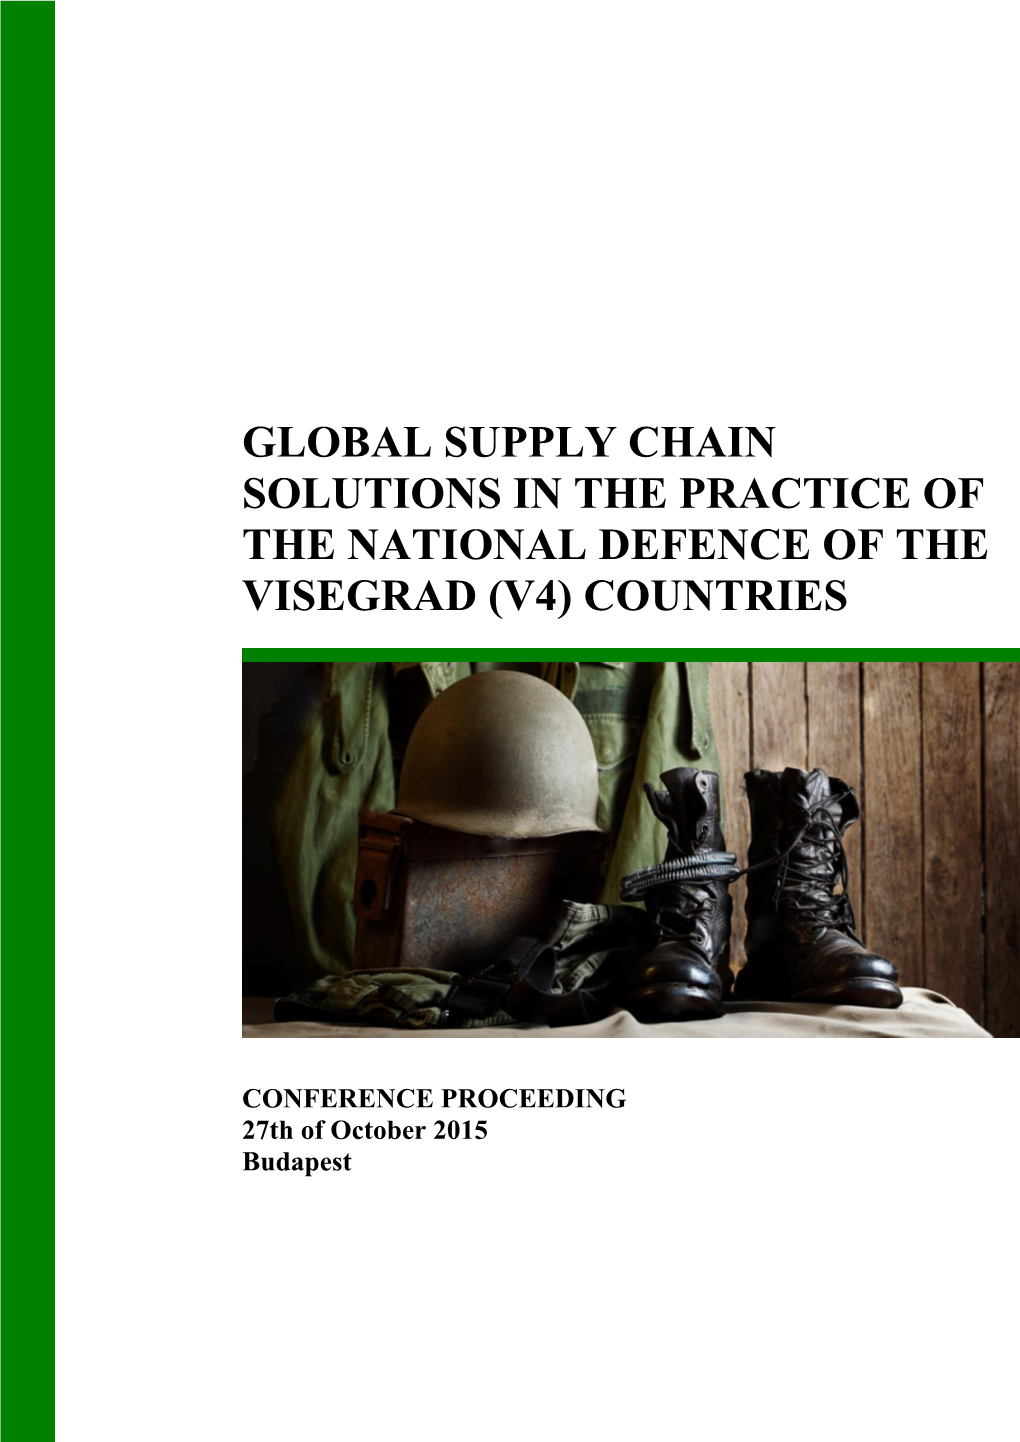 Global Supply Chain Solutions in the Practice of the National Defence of the Visegrad (V4) Countries